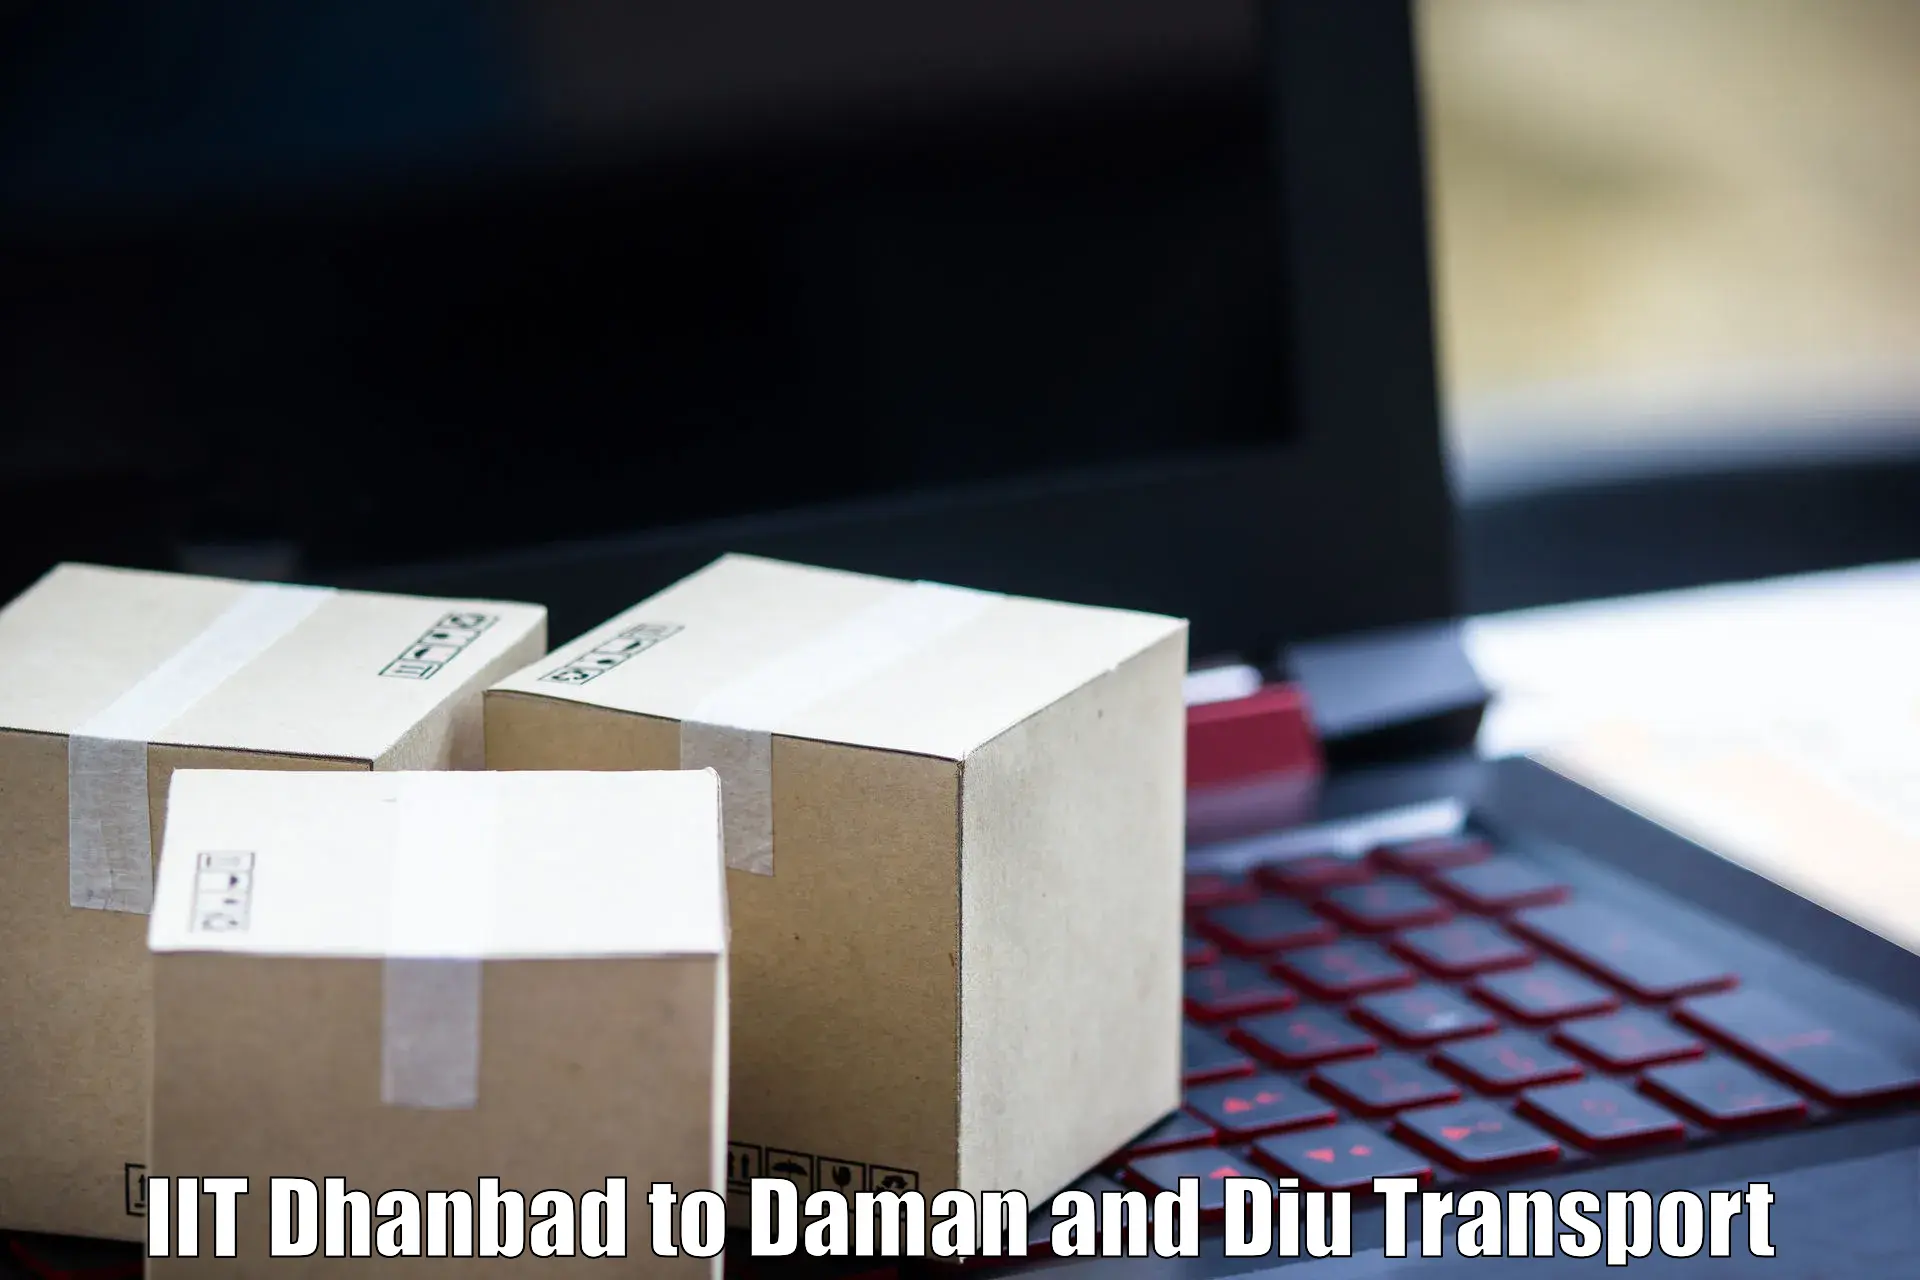 Interstate goods transport in IIT Dhanbad to Daman and Diu